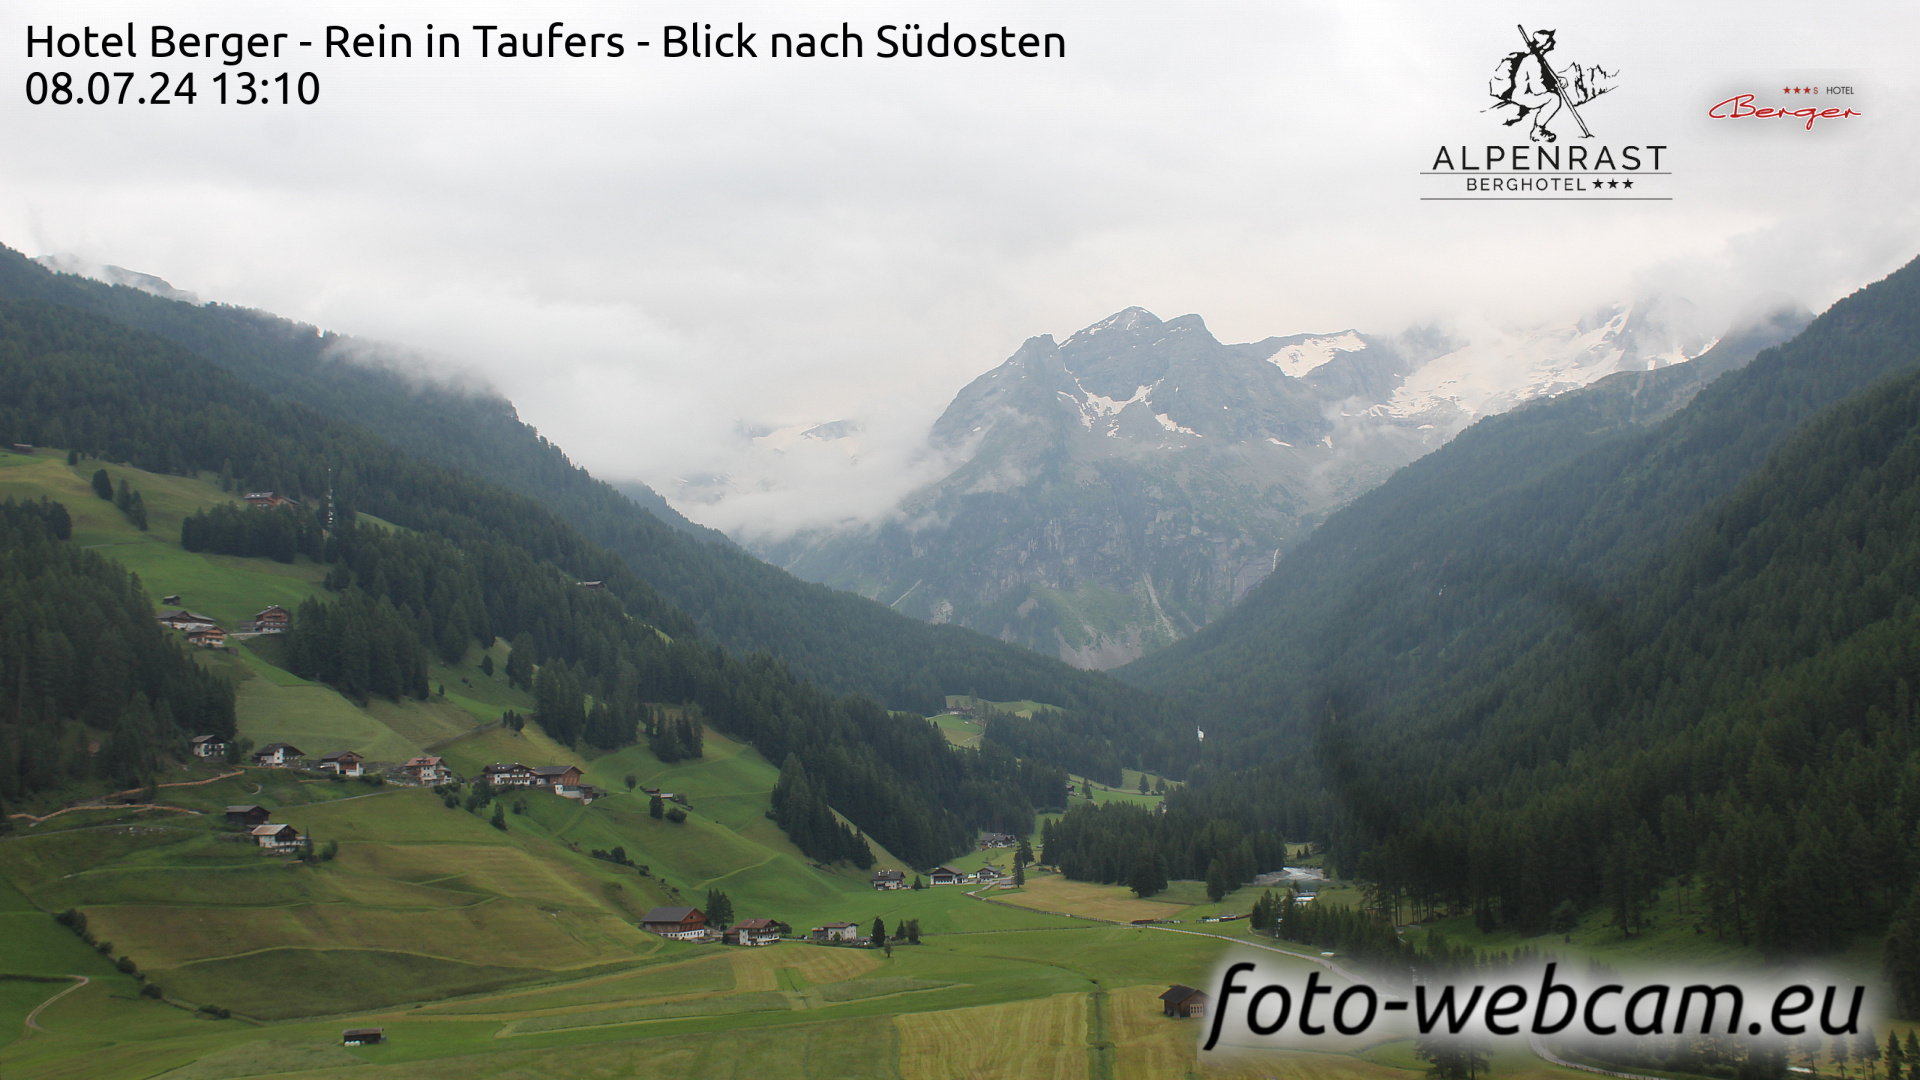 Rein in Taufers Me. 13:11